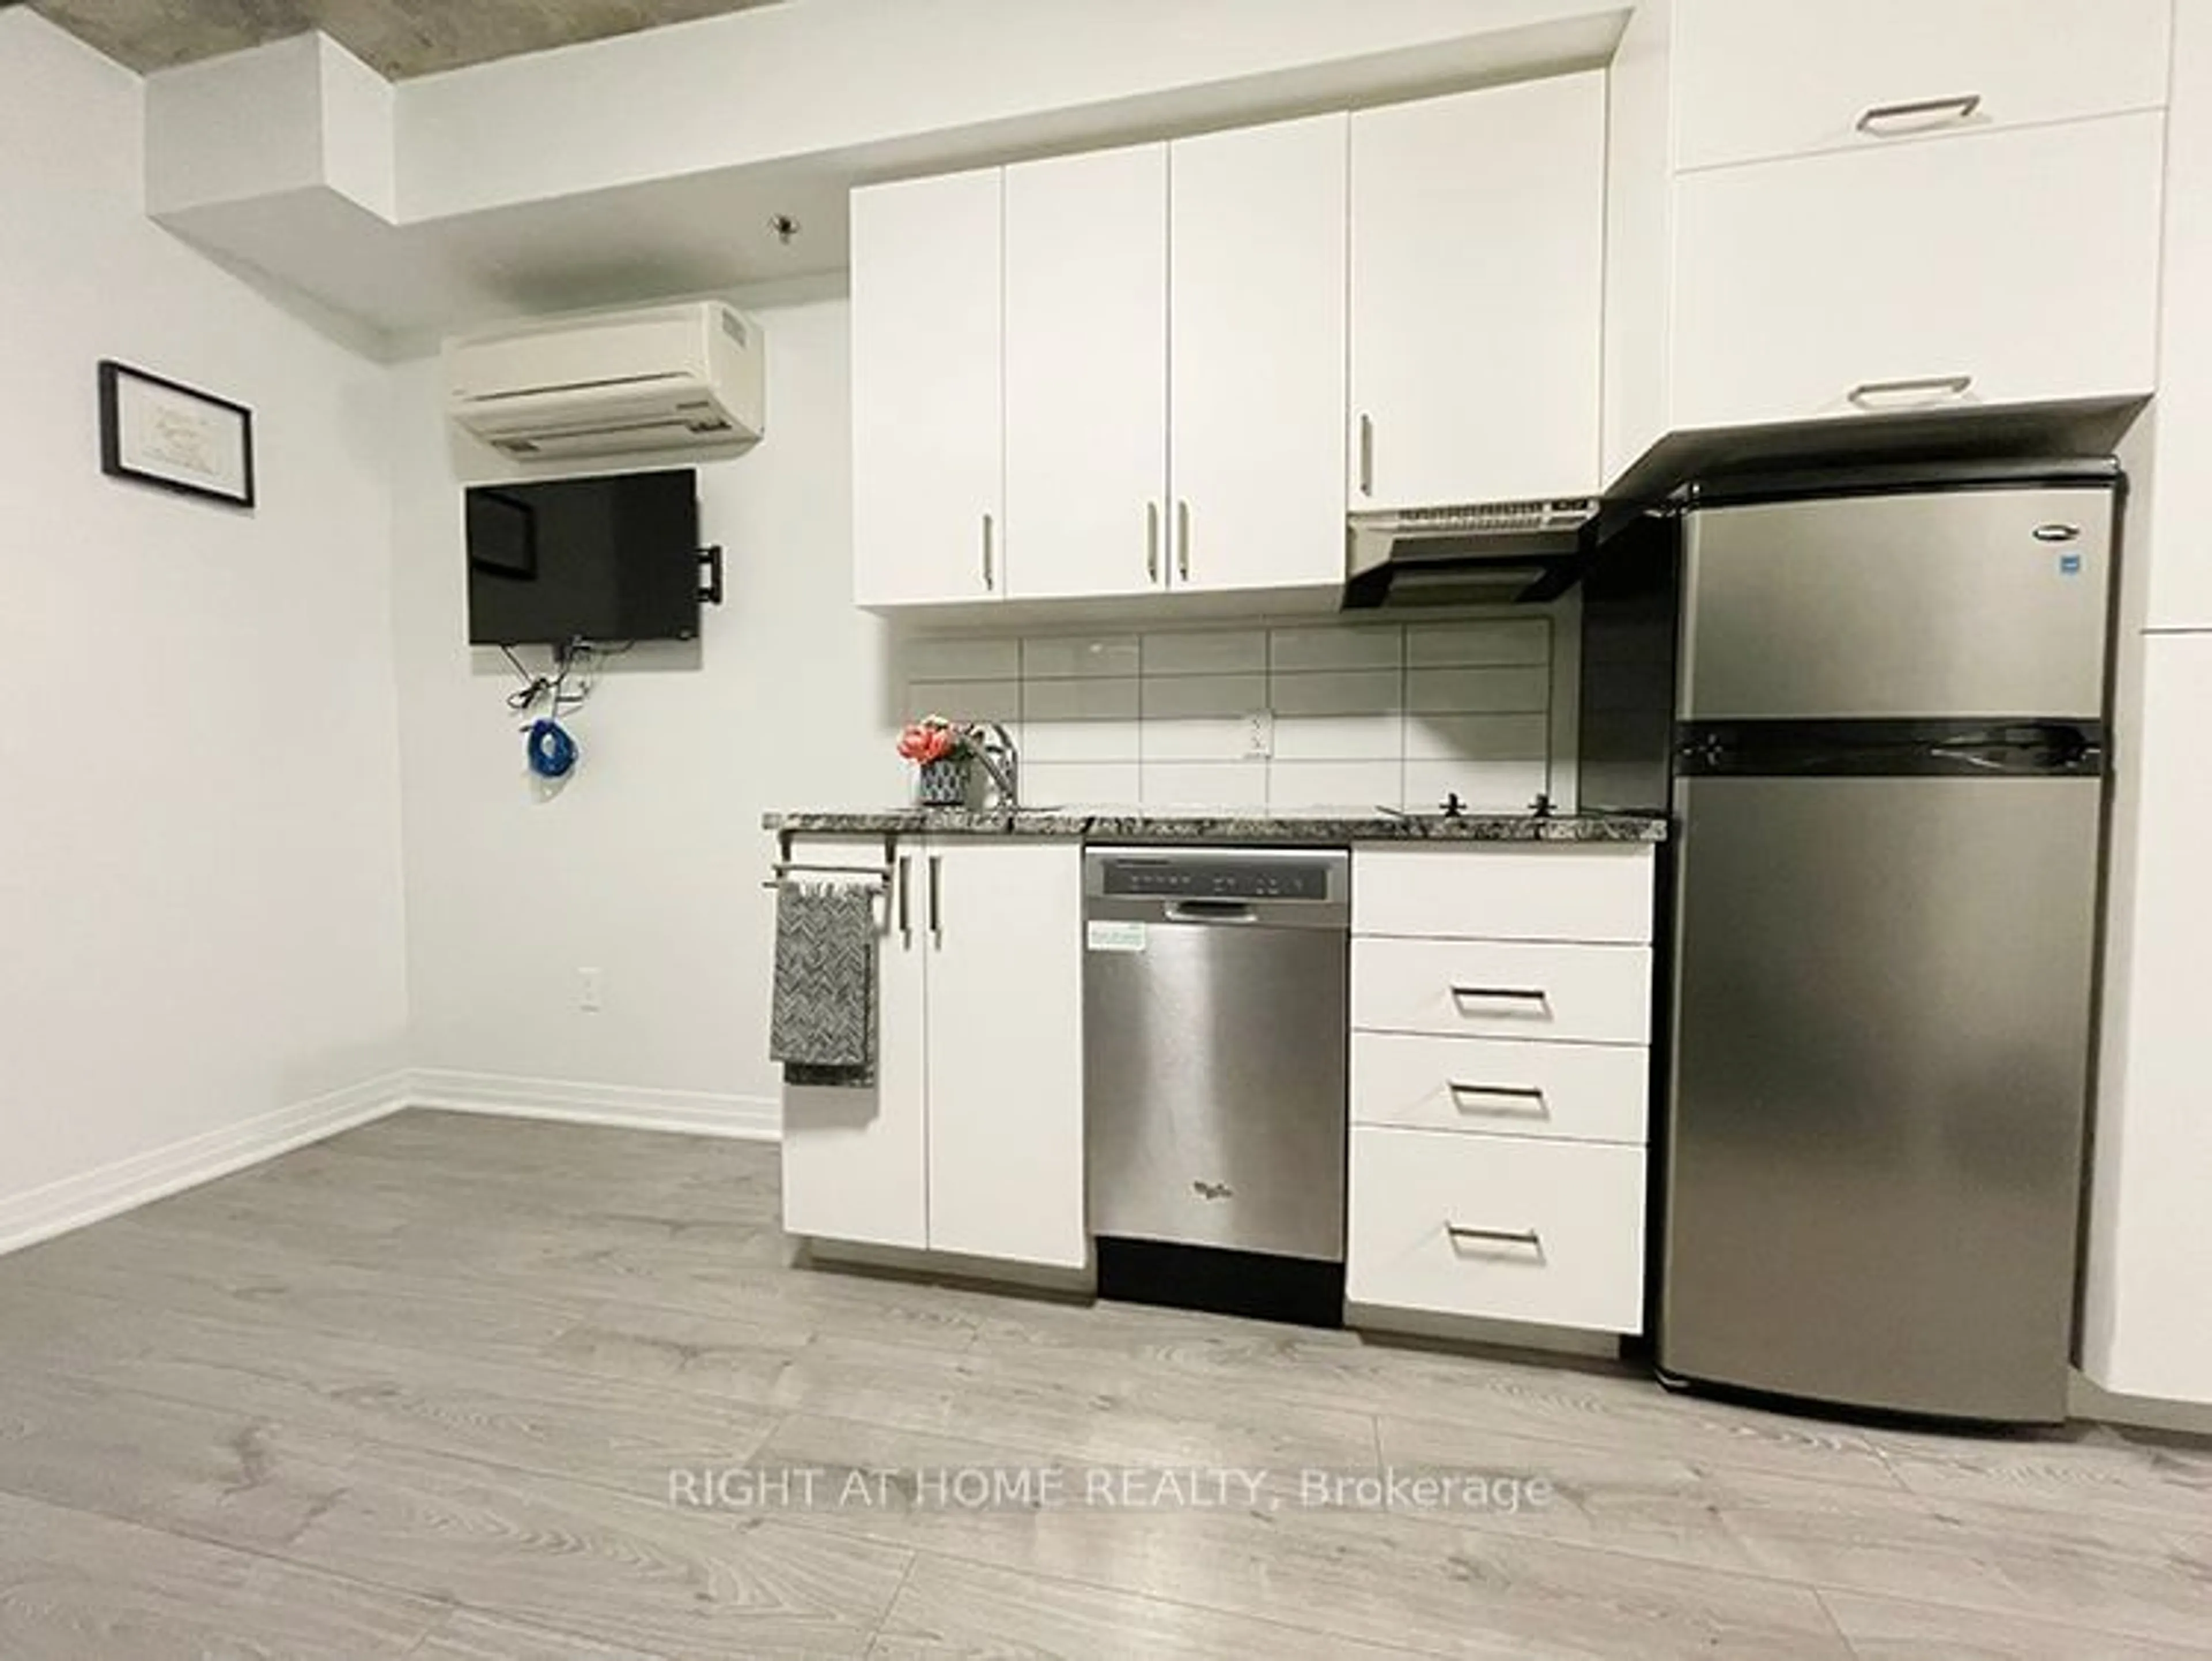 Standard kitchen for 1900 Simcoe St #338, Oshawa Ontario L1G 4Y3